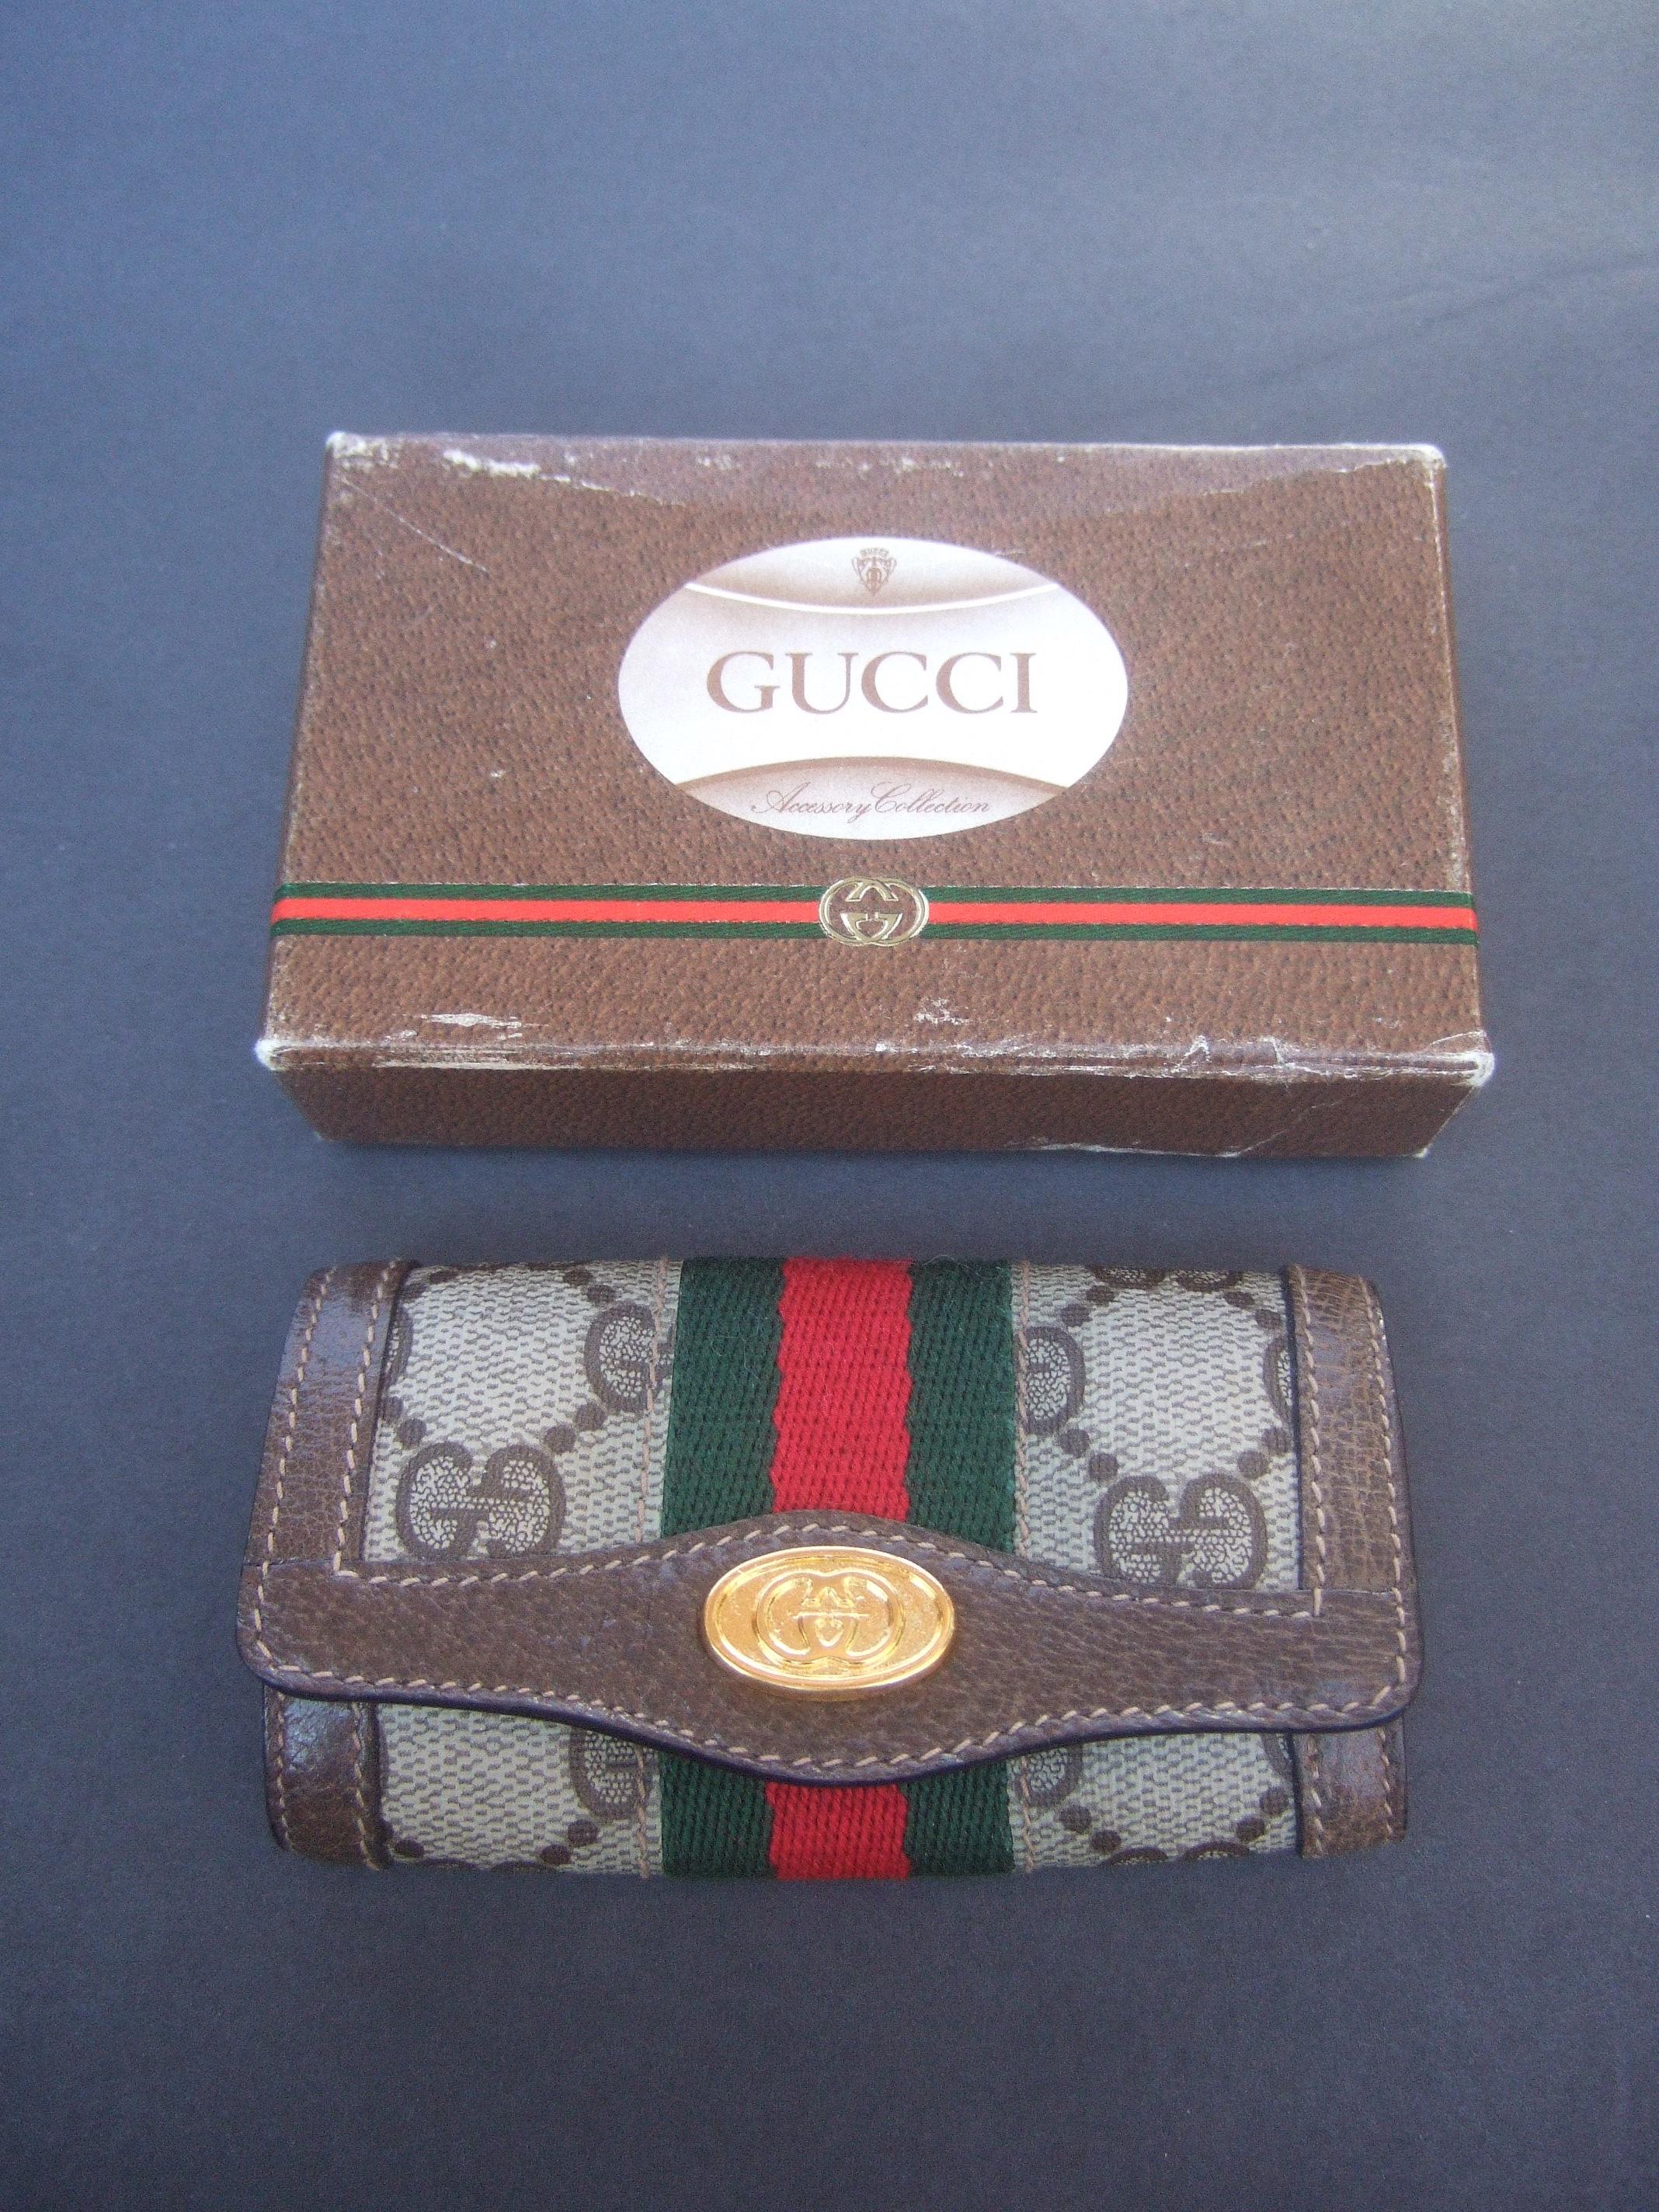 Gucci vintage keychain case in Gucci presentation box c 1980s
The stylish folded keychain case is designed with Gucci's signature coated canvas with brown leather trim

The clasp snap is adorned with Gucci's interlocked G.G. initials in gilt metal.